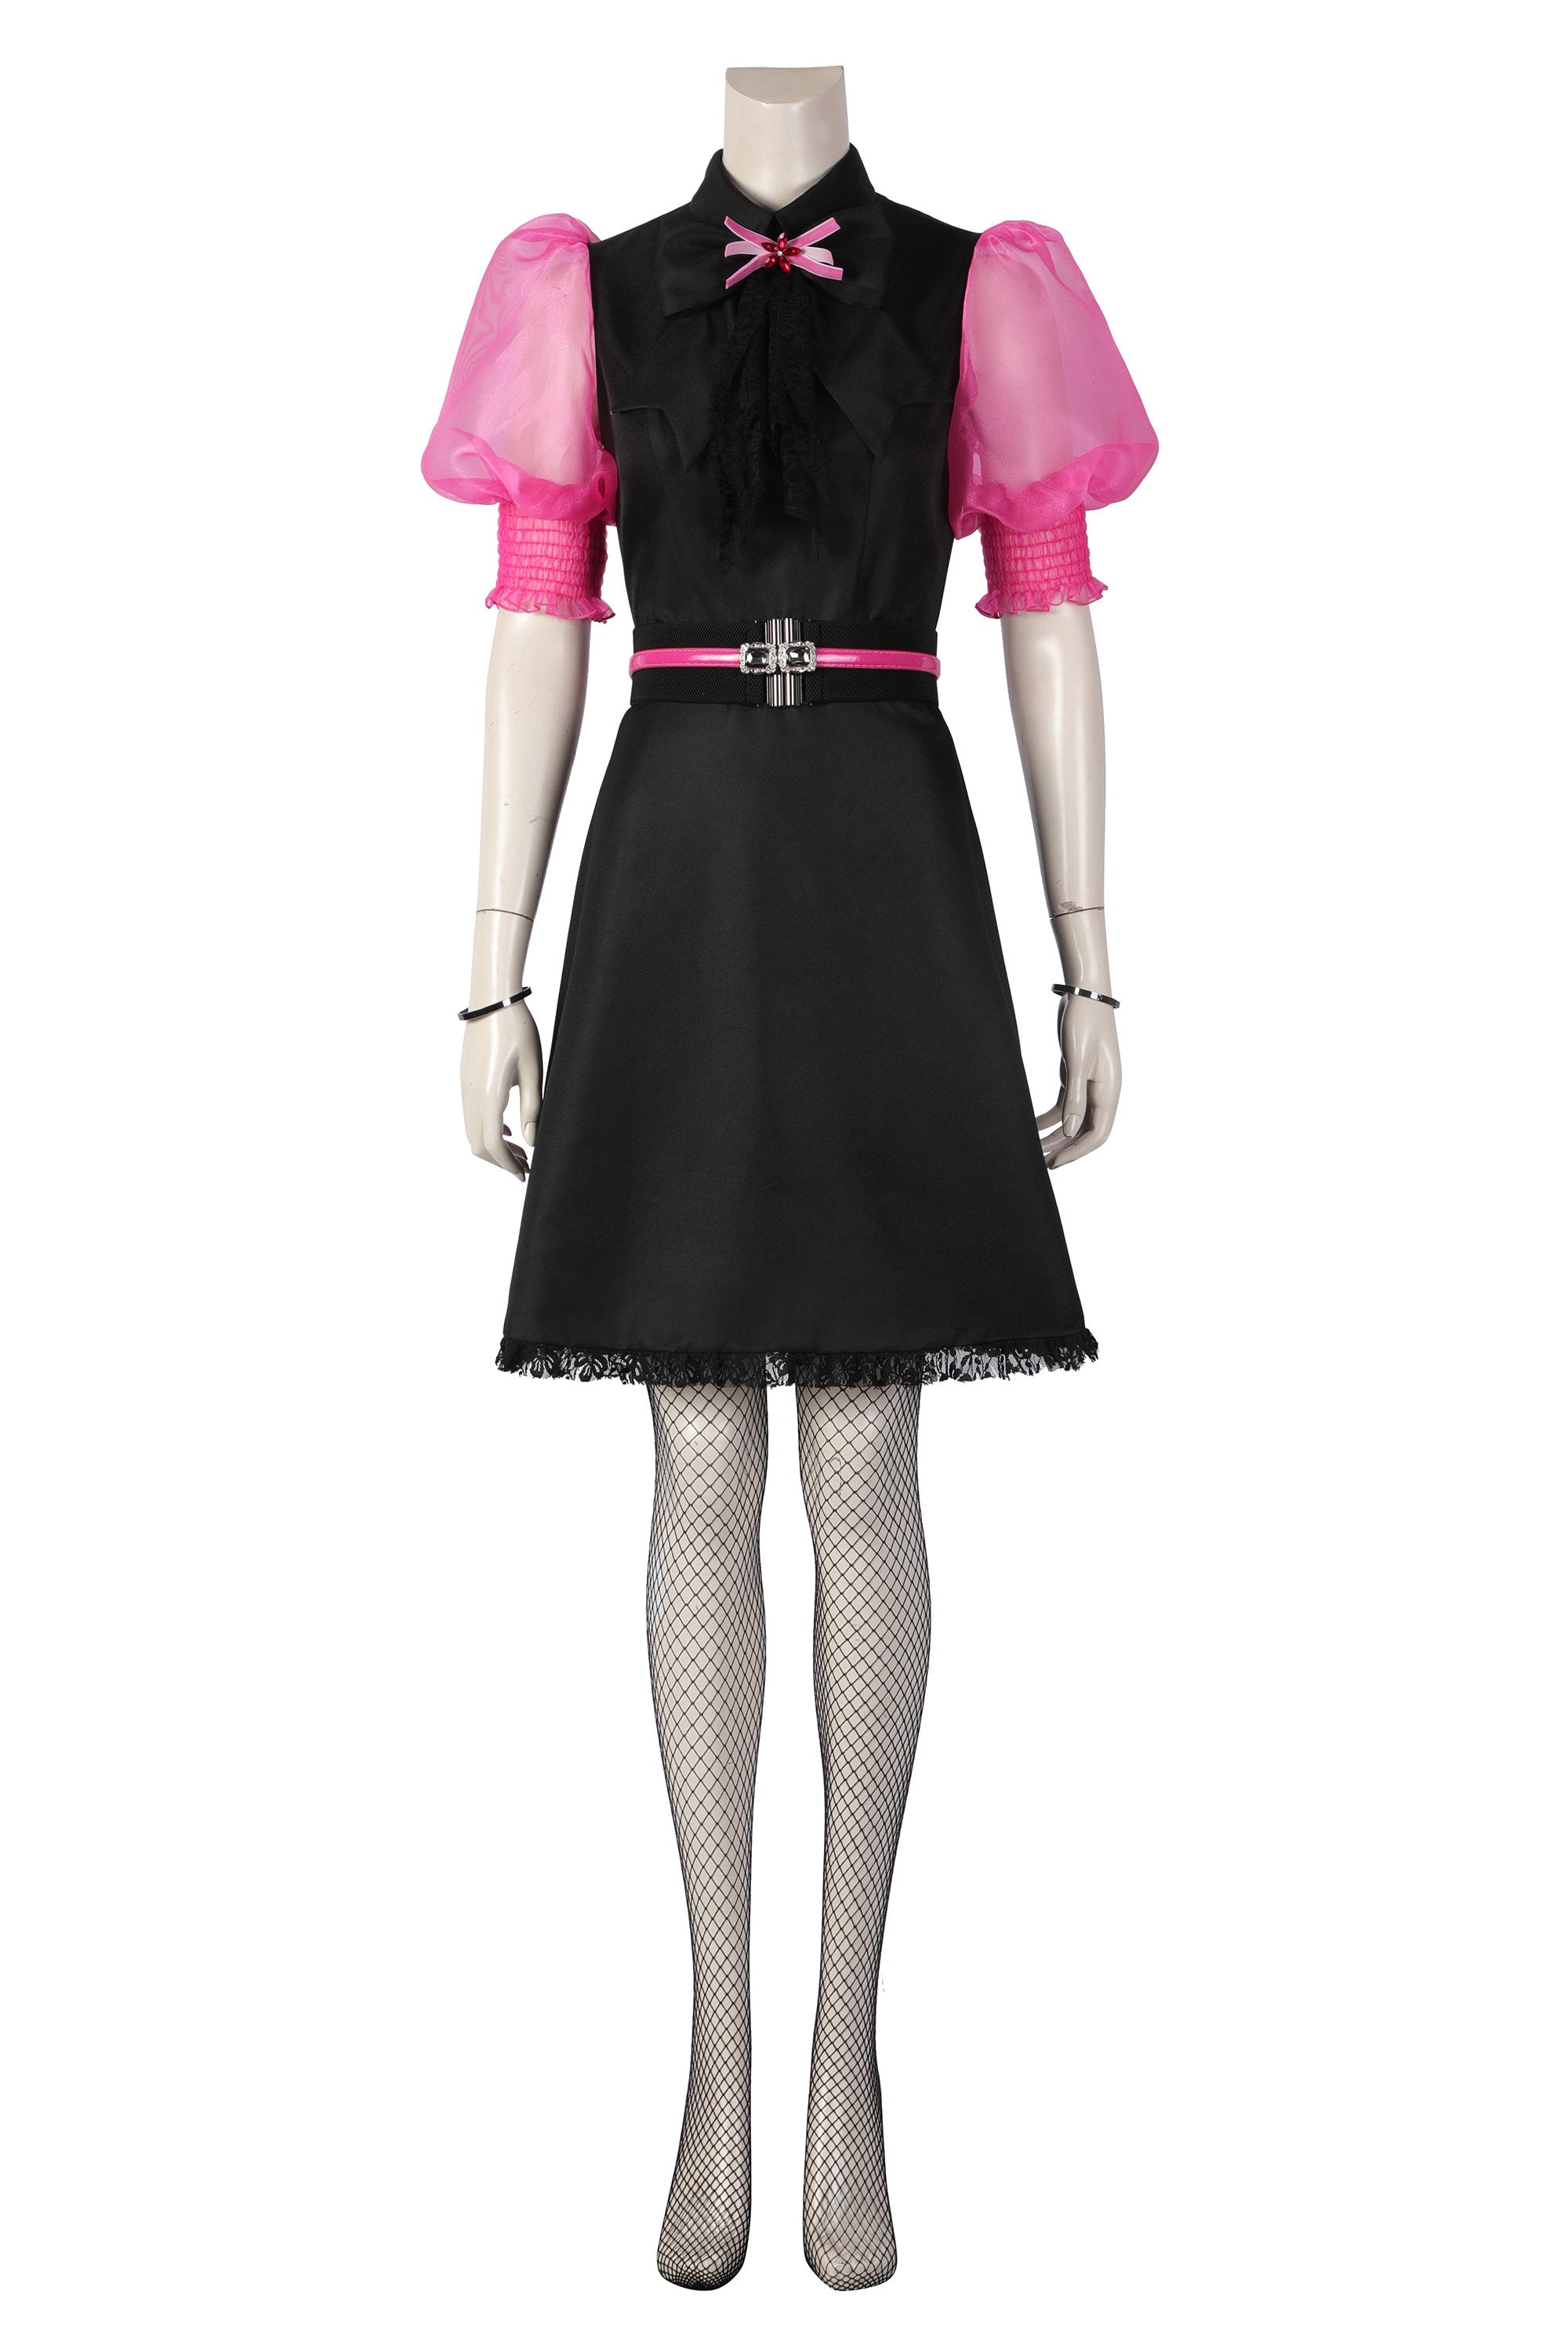 Monster High Live Action Draculaura Costumes Adults Halloween Cosplay Dress